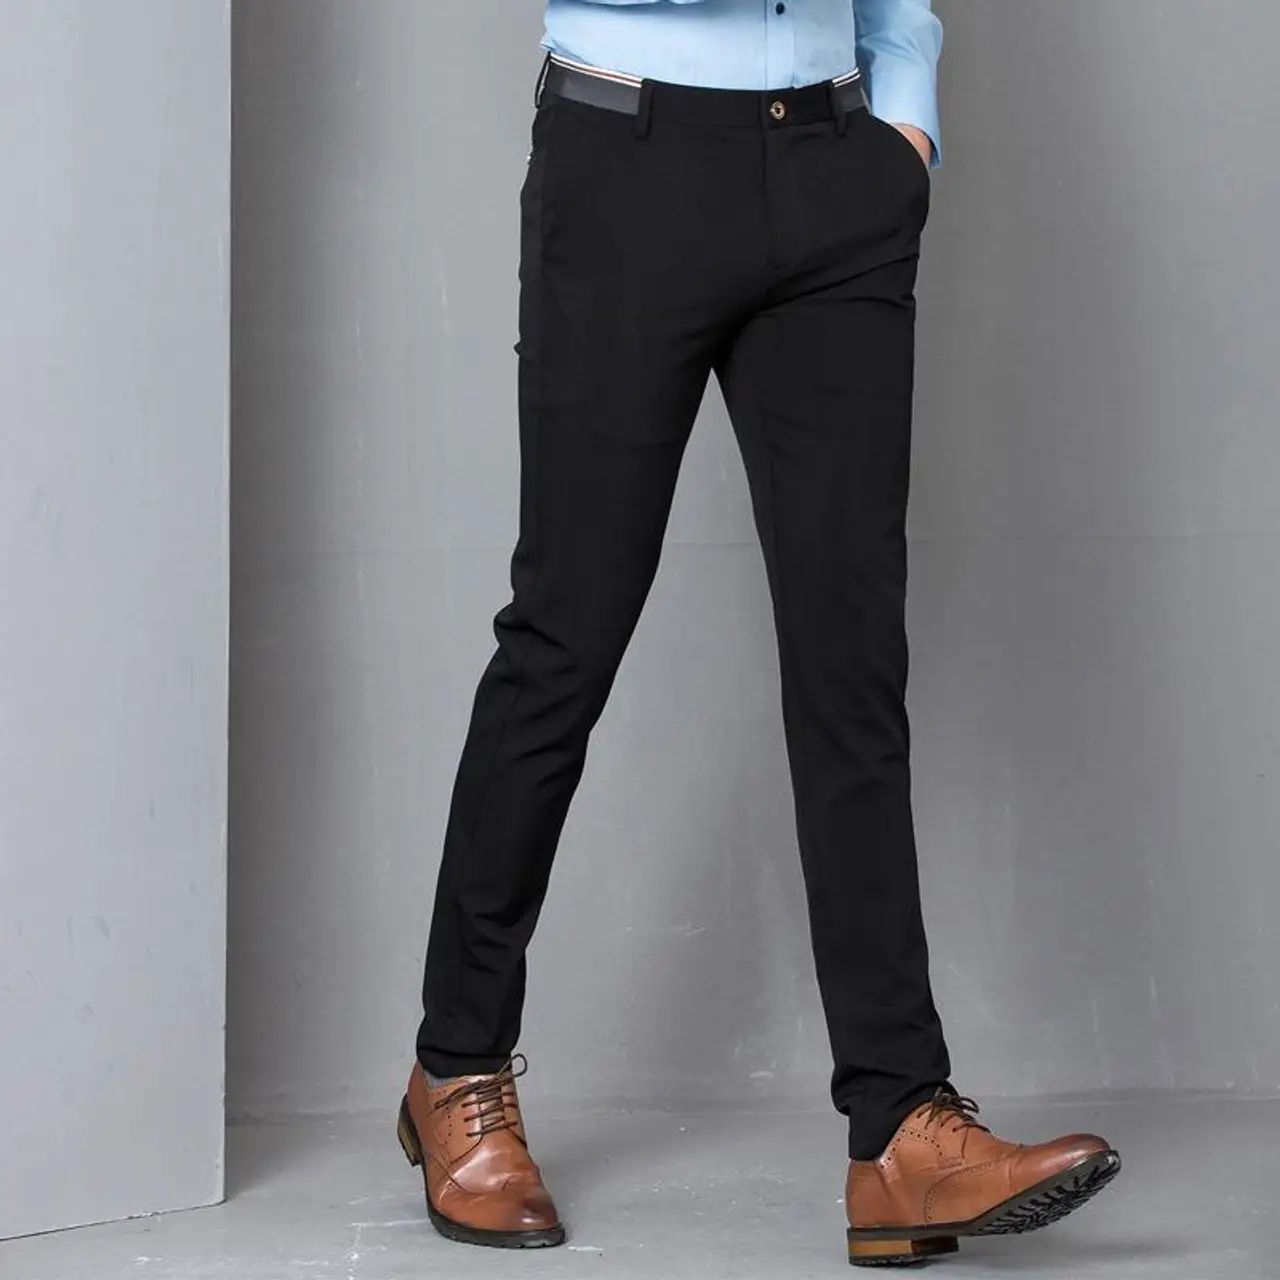 Business casual aesthetic pants for men